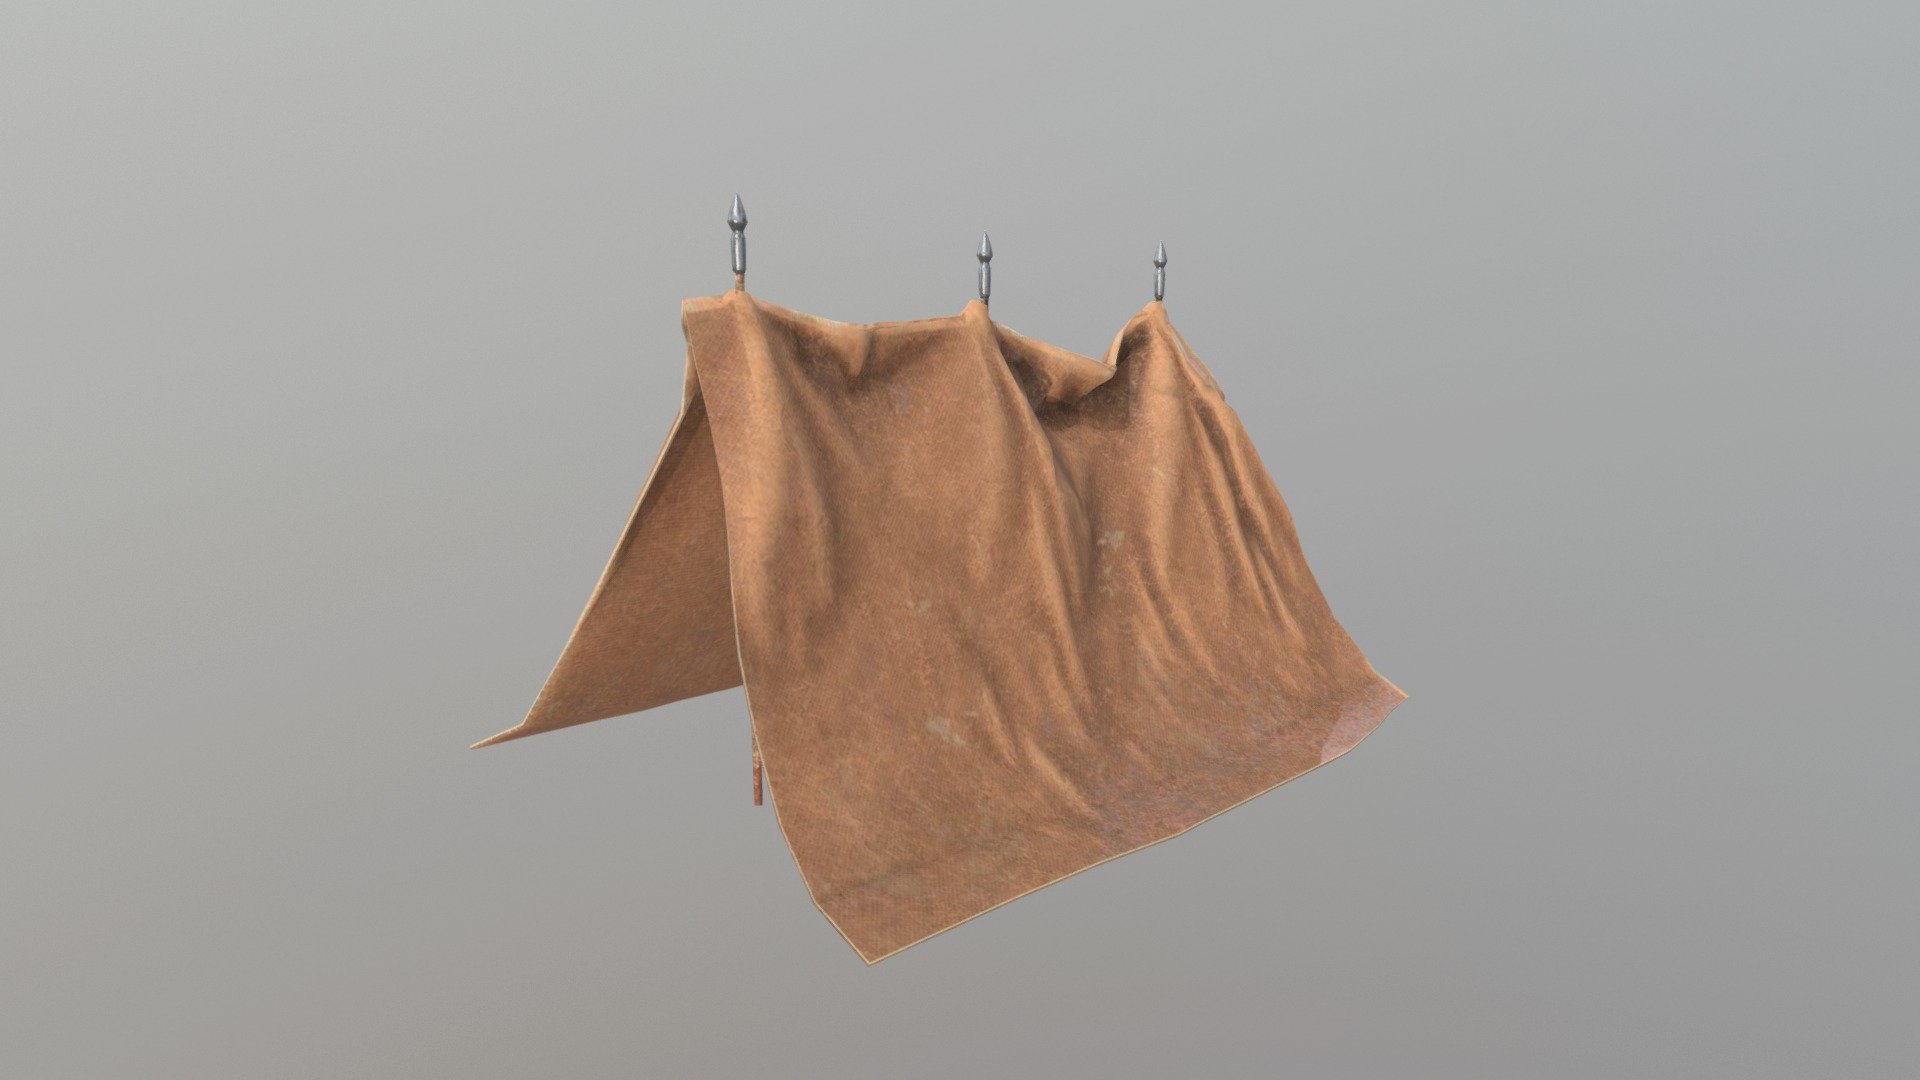 Dirty old tent. Made with nCloth and Quad Draw. Baked and textured in Substance Painter 2.

Made for a school project, assets for UE4 3d model